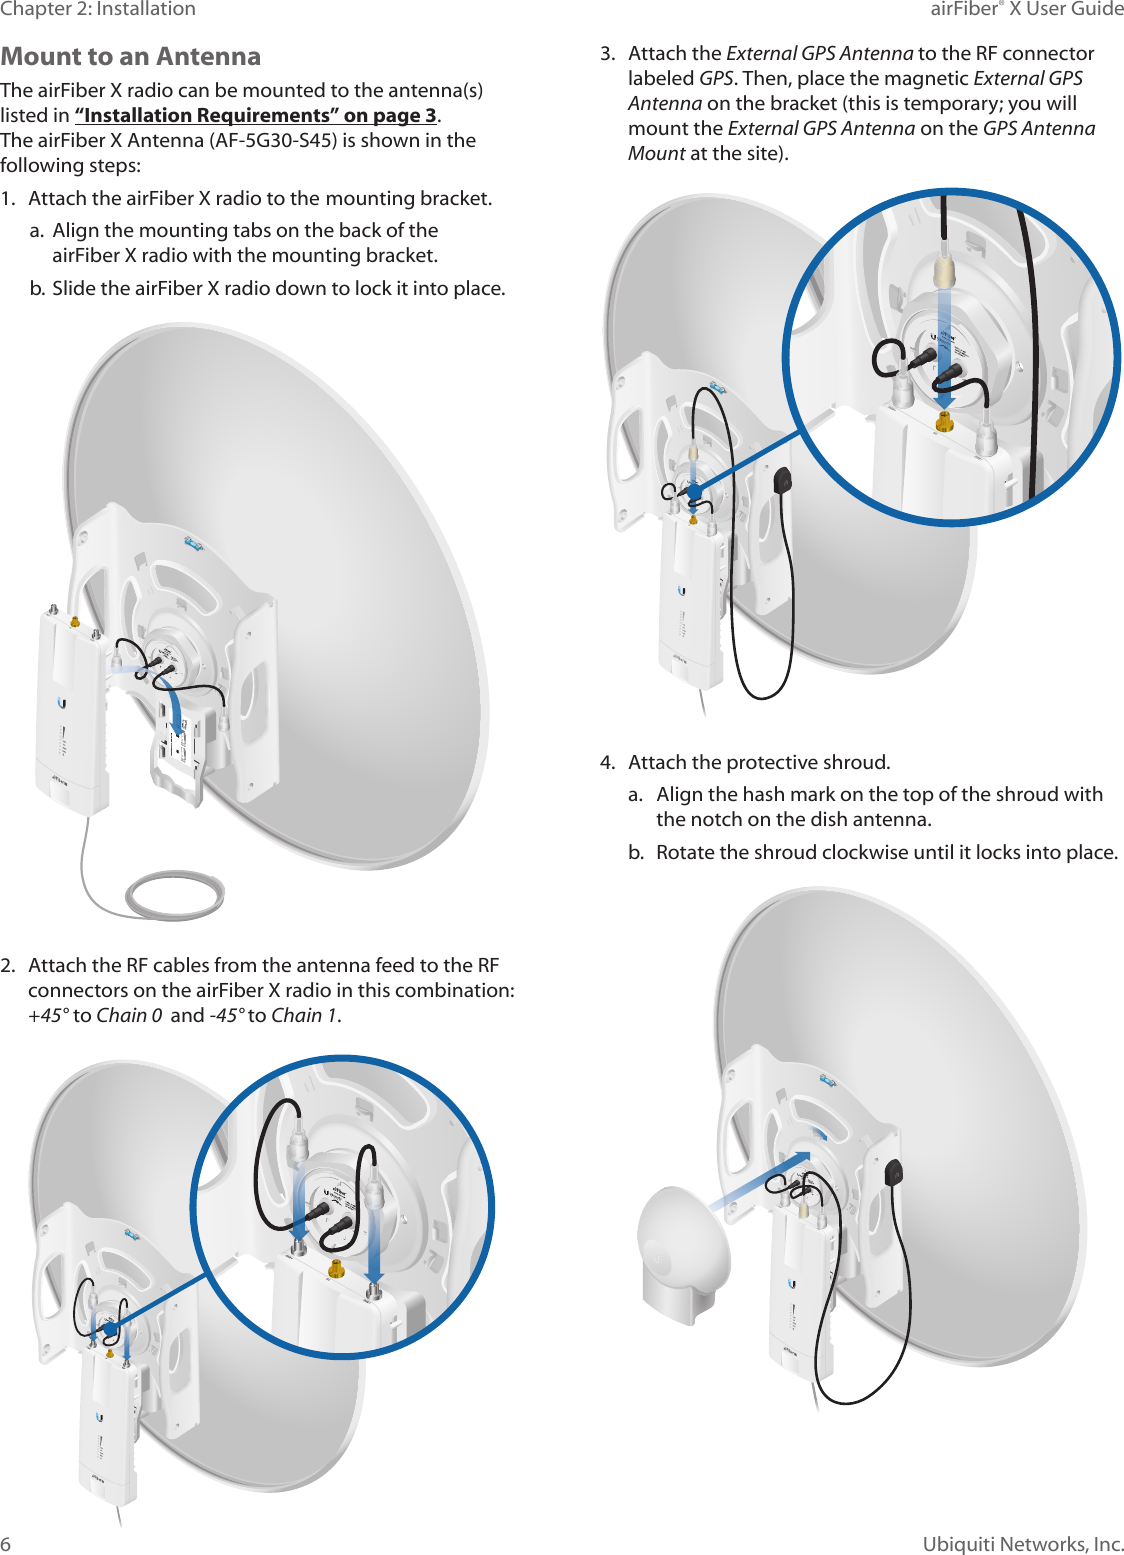 6Chapter 2: Installation airFiber® X User GuideUbiquiti Networks, Inc.Mount to an AntennaThe airFiberX radio can be mounted to the antenna(s) listed in “Installation Requirements” on page 3. The airFiber X Antenna (AF-5G30-S45) is shown in the following steps:1. Attach the airFiberX radio to the mounting bracket.a. Align the mounting tabs on the back of theairFiberX radio with the mounting bracket.b. Slide the airFiberX radio down to lock it into place.2. Attach the RF cables from the antenna feed to the RFconnectors on the airFiberX radio in this combination:+45°to Chain 0  and -45° to Chain 1.3. Attach the External GPS Antenna to the RF connectorlabeled GPS. Then, place the magnetic External GPS Antenna on the bracket (this is temporary; you willmount the External GPS Antenna on the GPS Antenna Mount at the site).4. Attach the protective shroud.a. Align the hash mark on the top of the shroud withthe notch on the dish antenna.b.  Rotate the shroud clockwise until it locks into place.